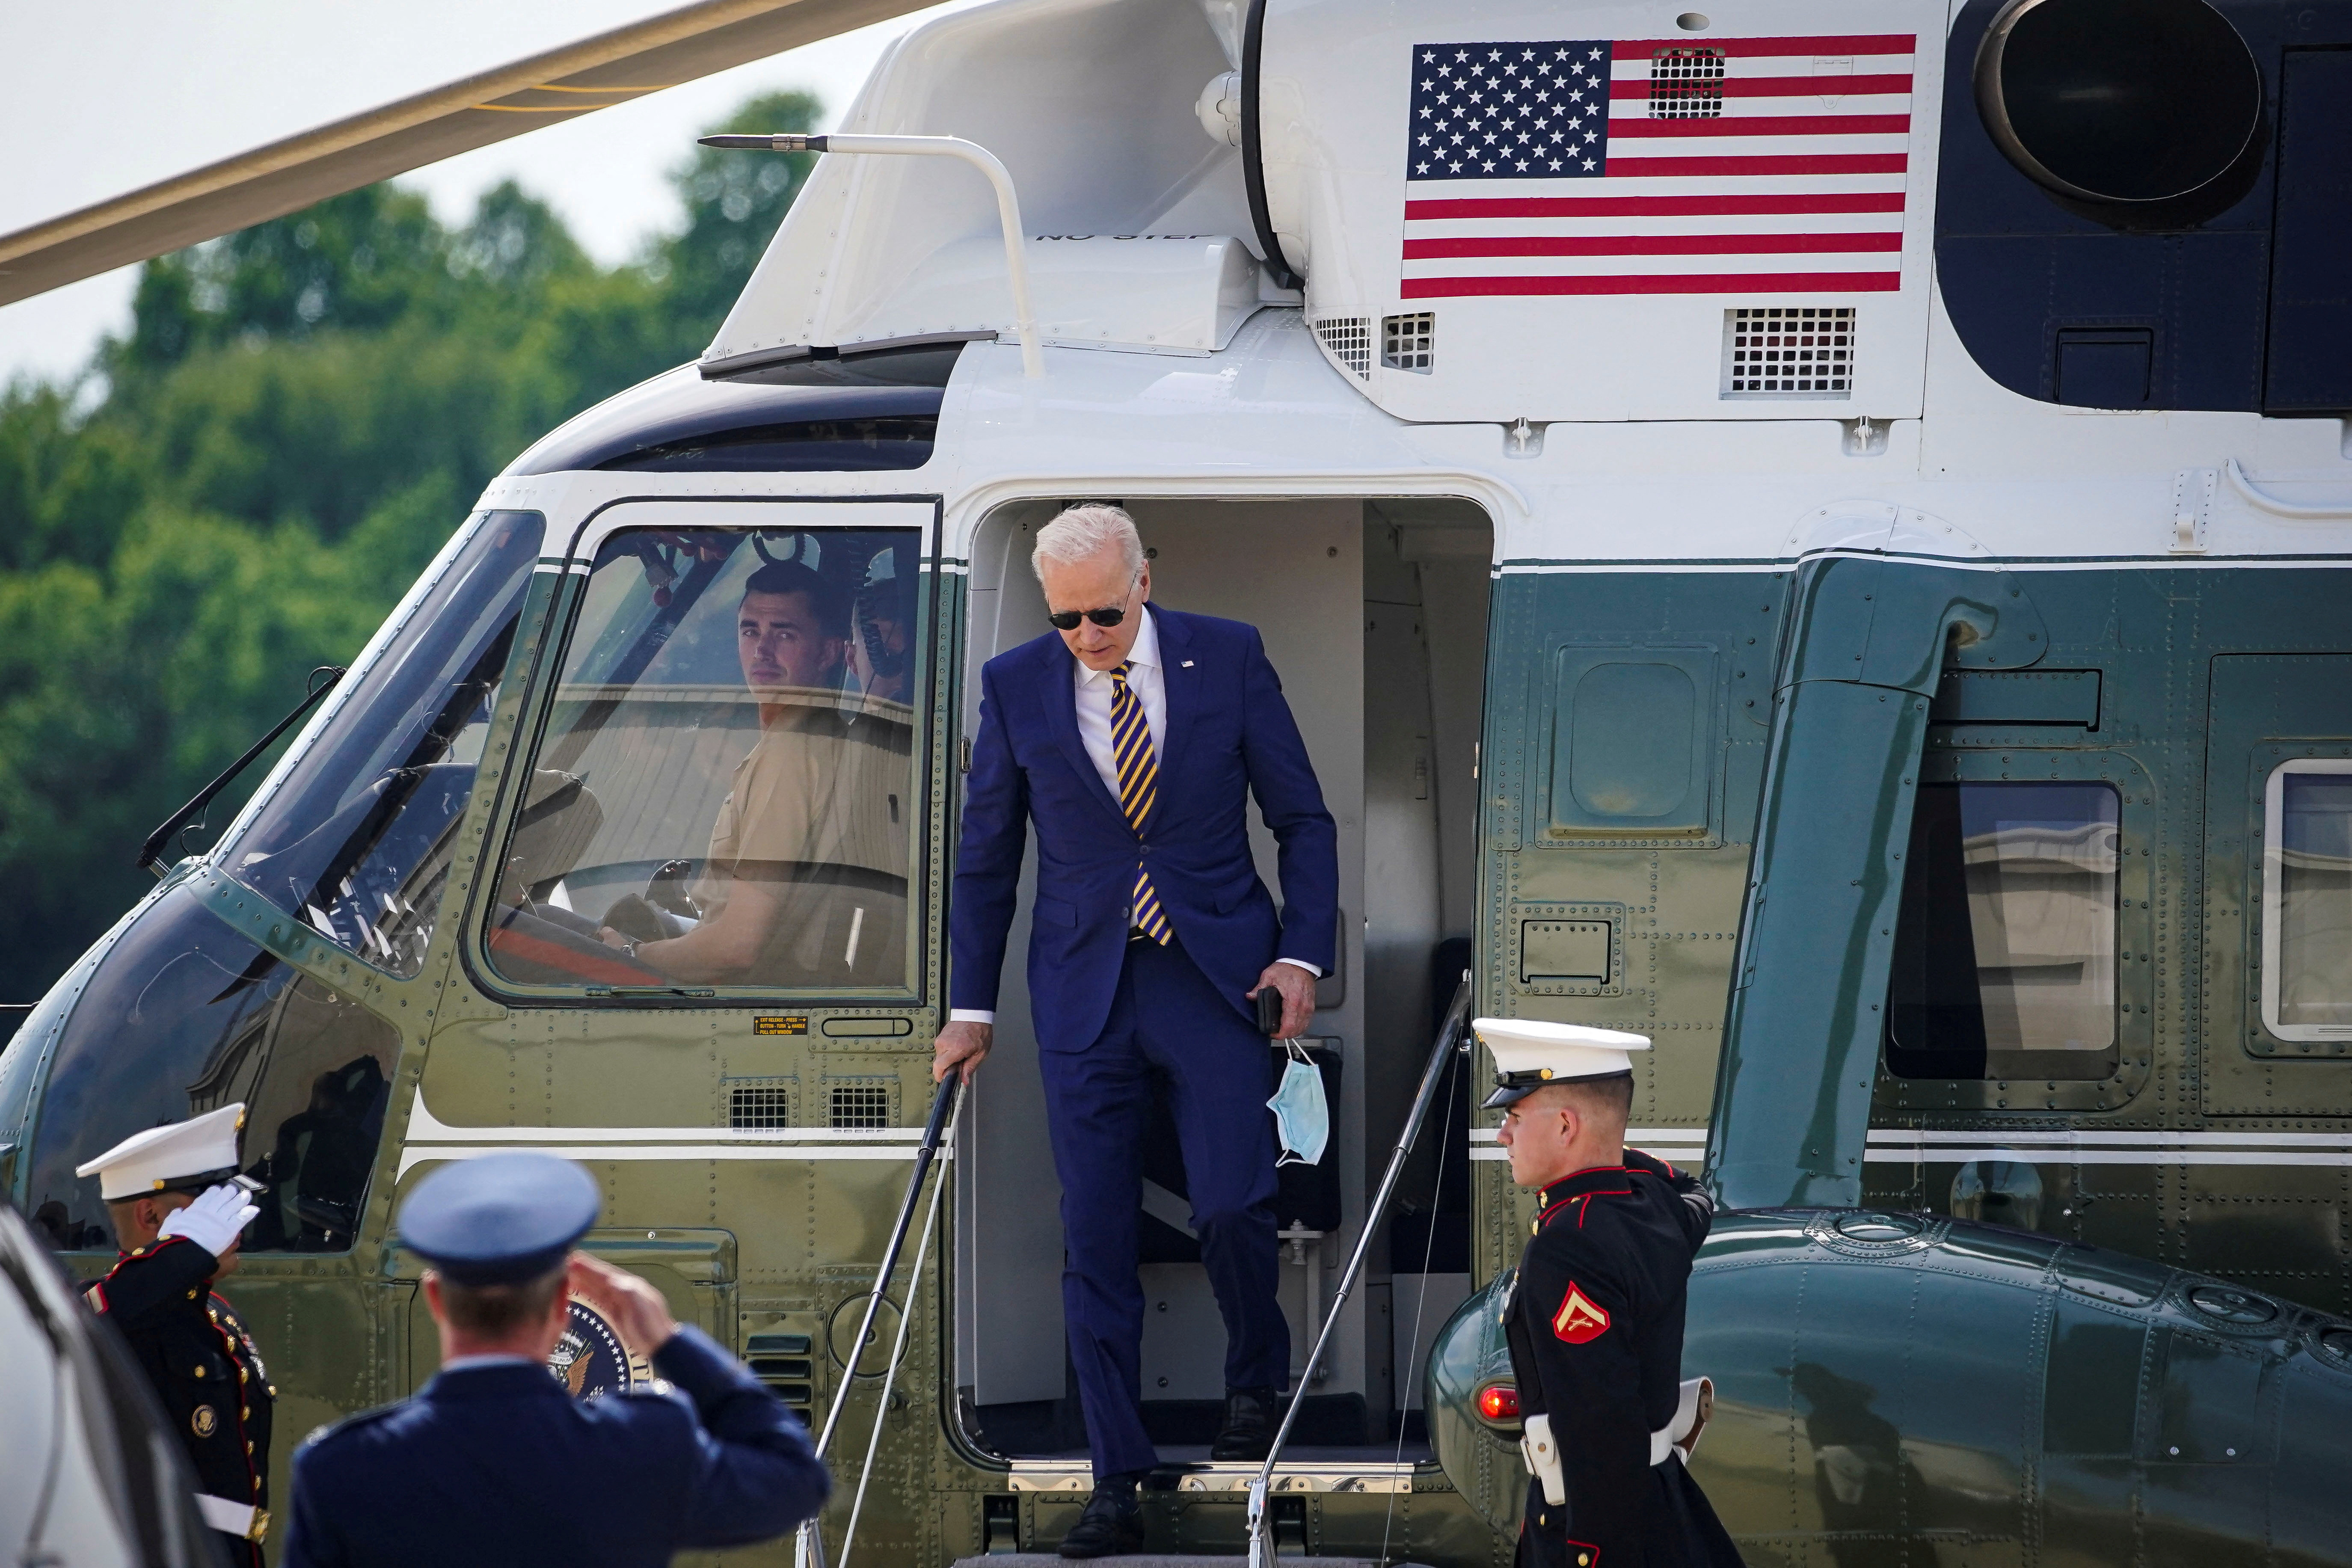 U.S. President Joe Biden arrives on Marine One for a weekend trip to his home in Wilmington at Delaware Air National Guard Base